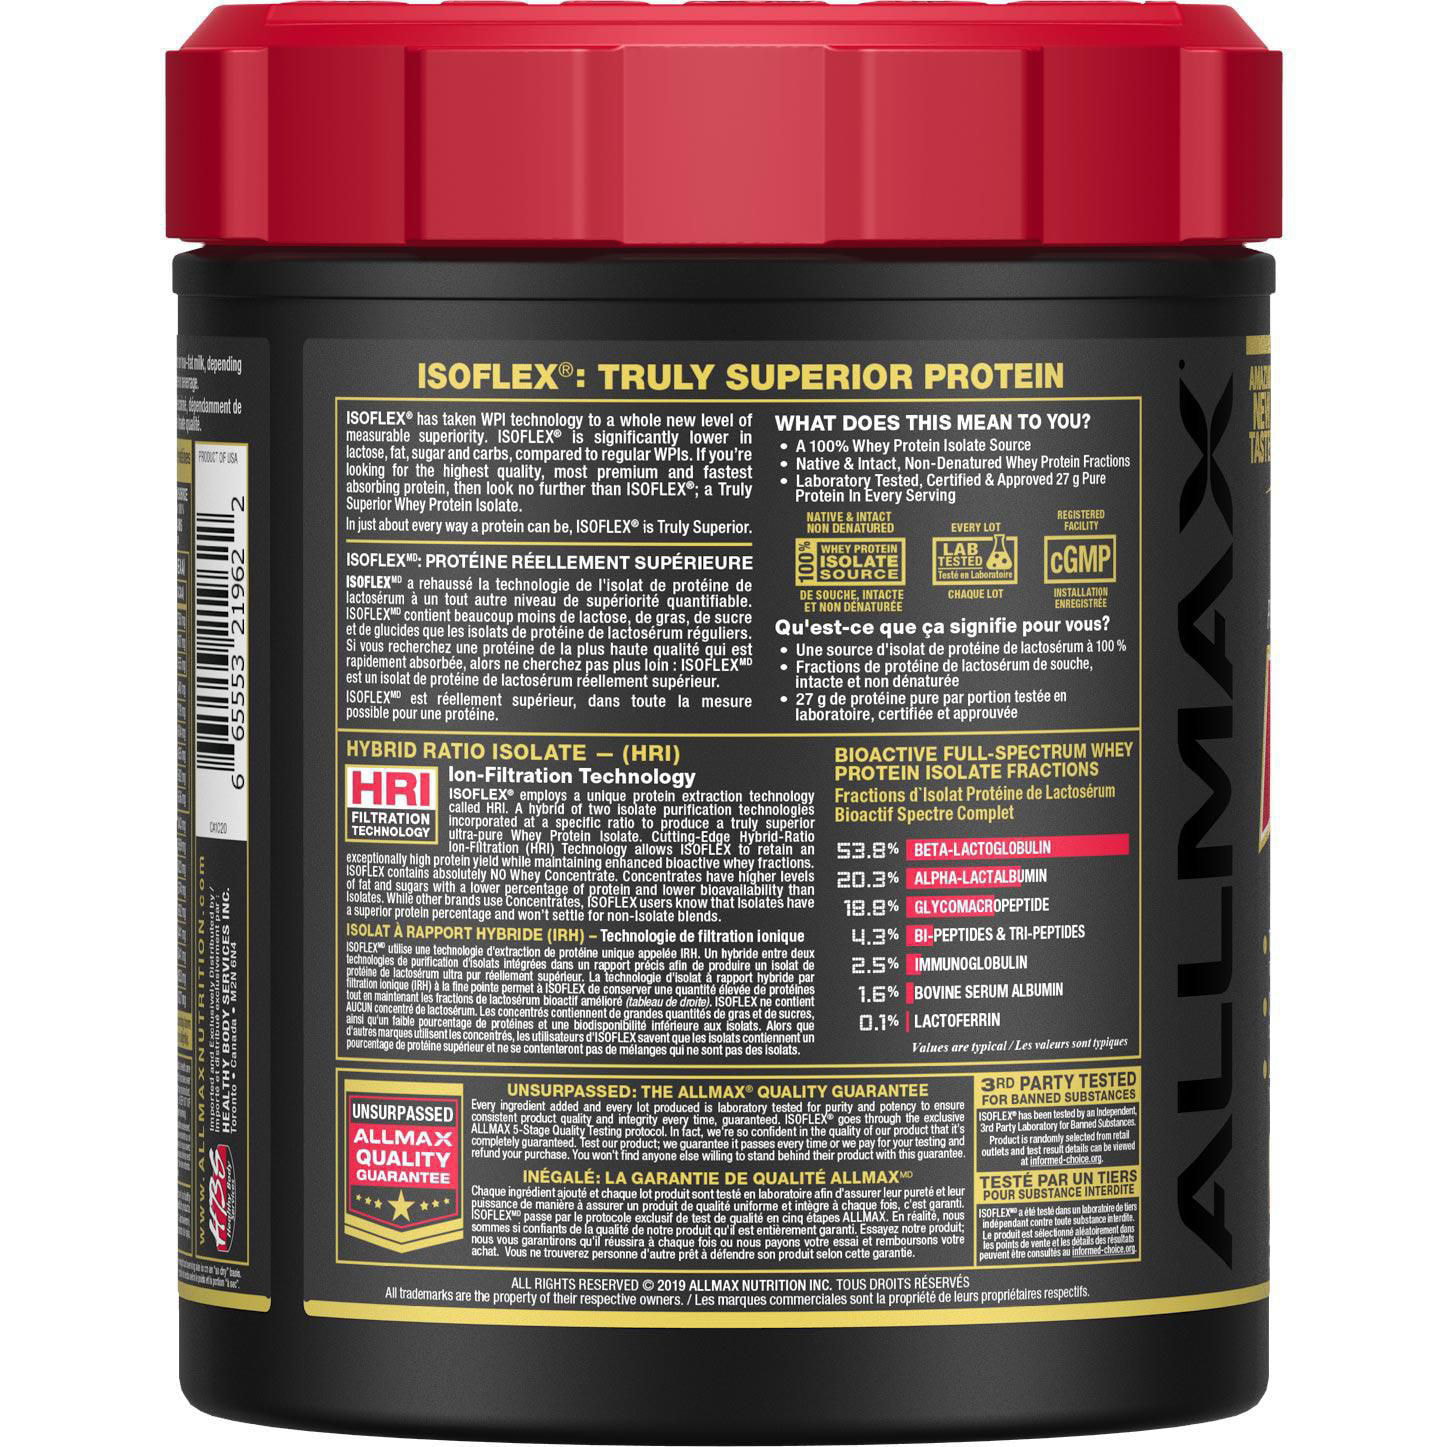 Allmax Isoflex pure whey protein isolate chocolate peanut butter, 425g  Isolate protein powder 